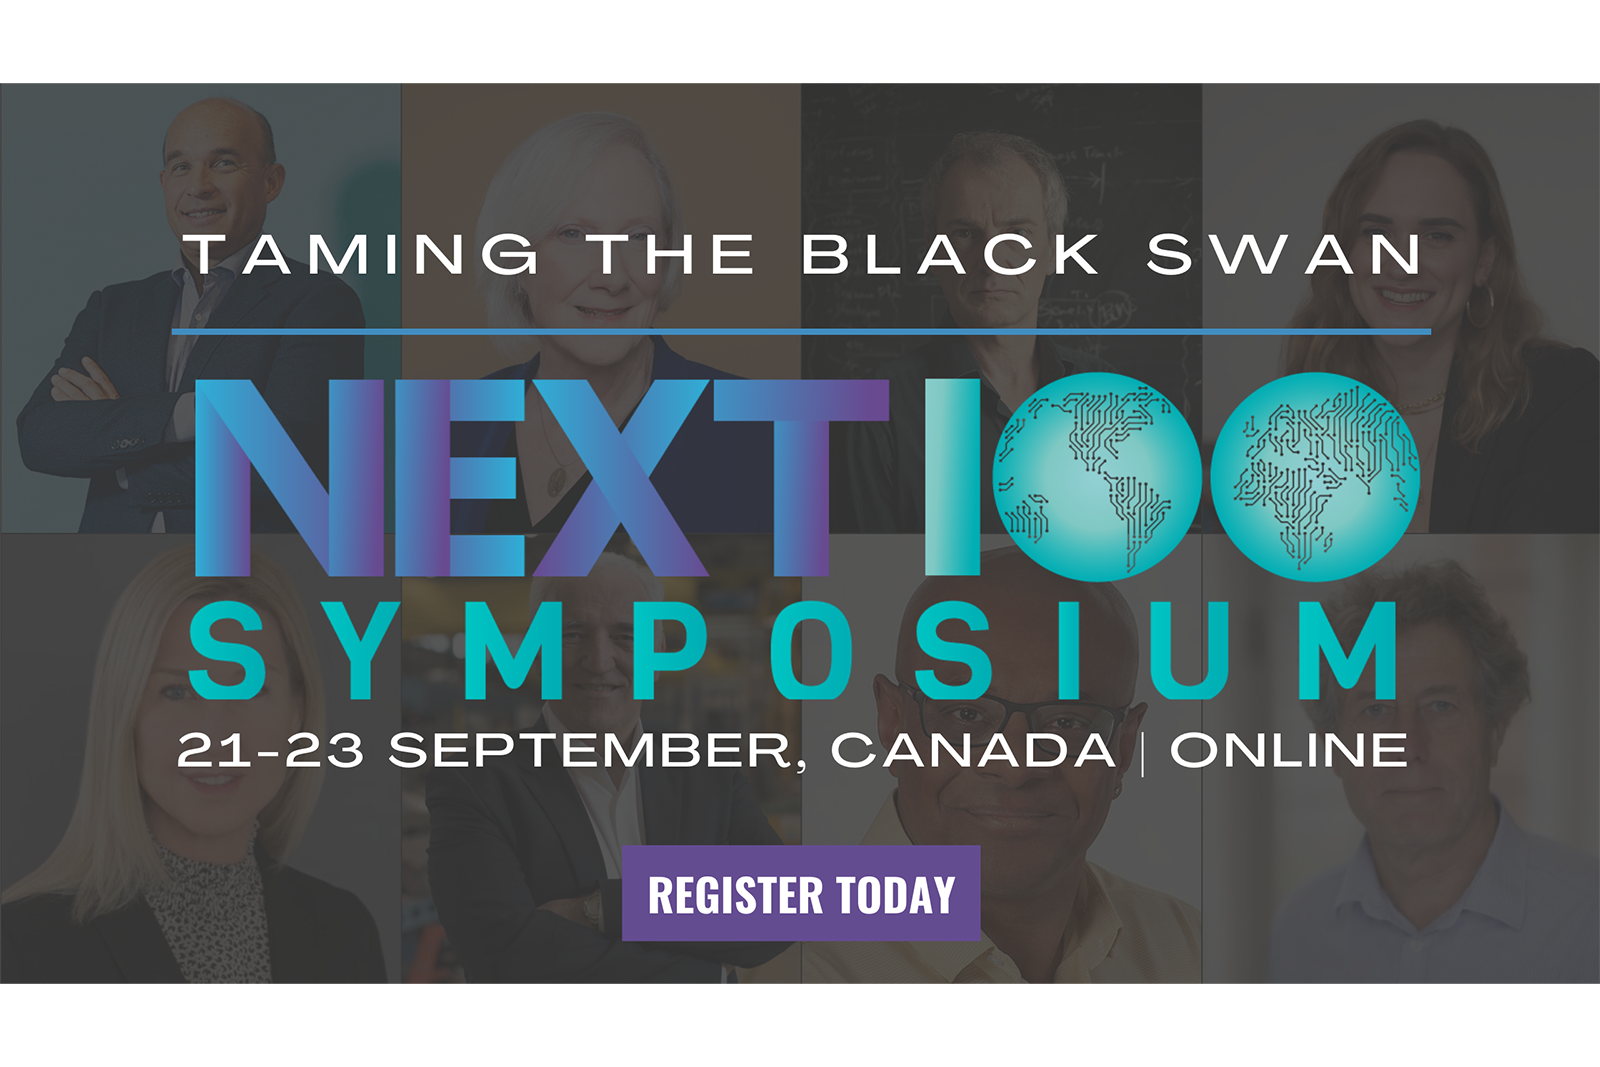 The title of the symposium, Taming the Black Swan Next 100, with images of theindividual speakers in the background